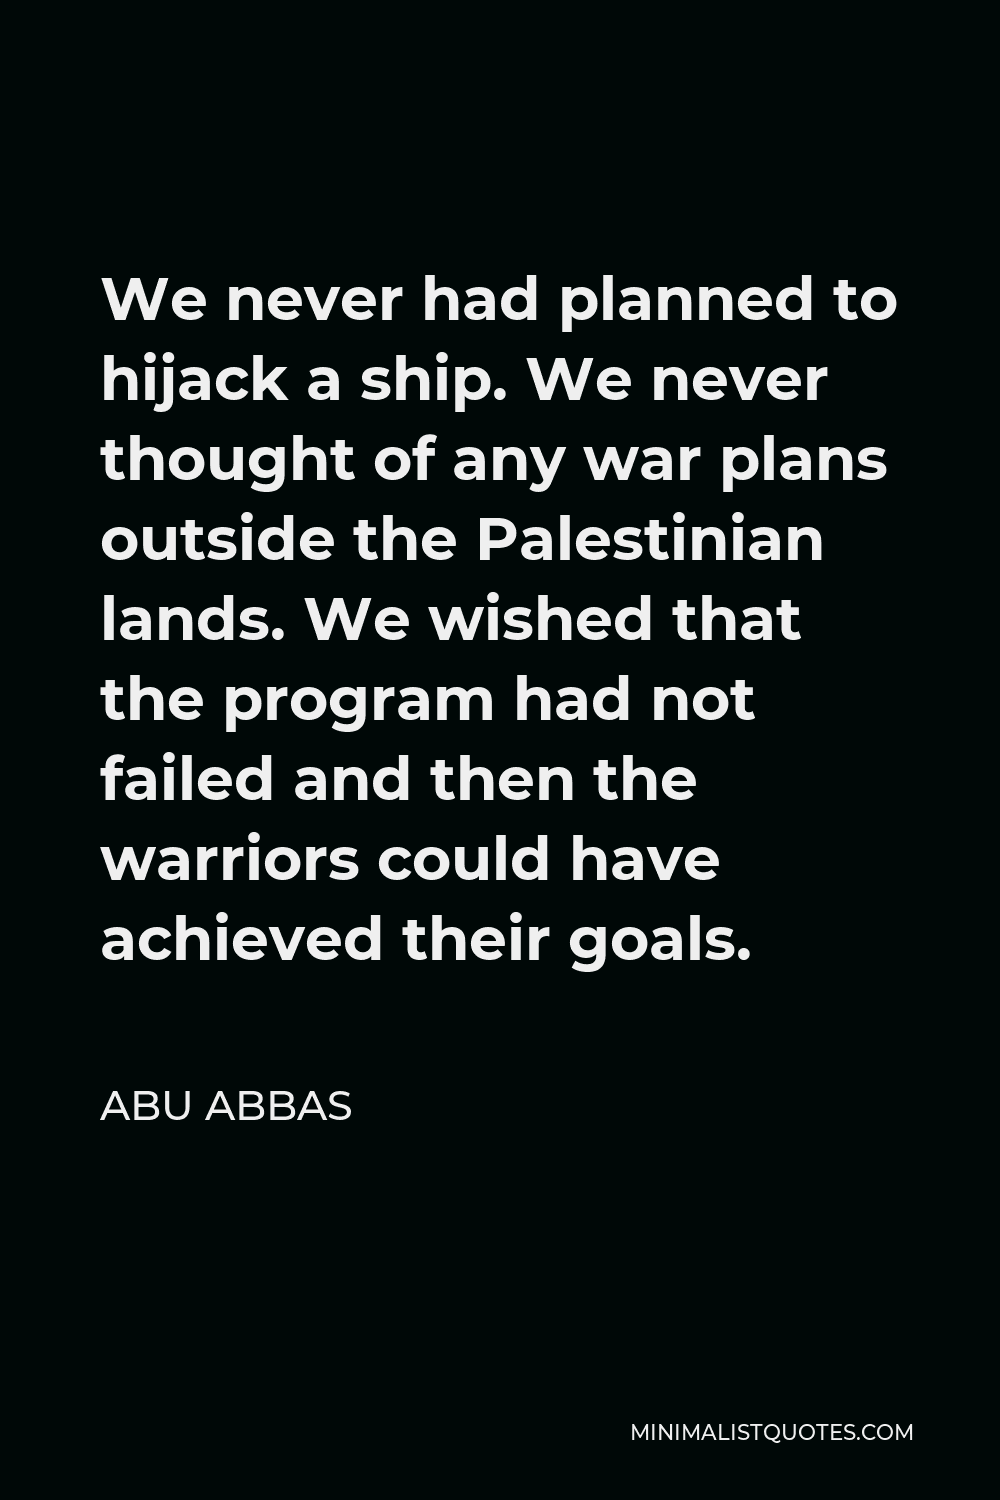 Abu Abbas Quote - We never had planned to hijack a ship. We never thought of any war plans outside the Palestinian lands. We wished that the program had not failed and then the warriors could have achieved their goals.